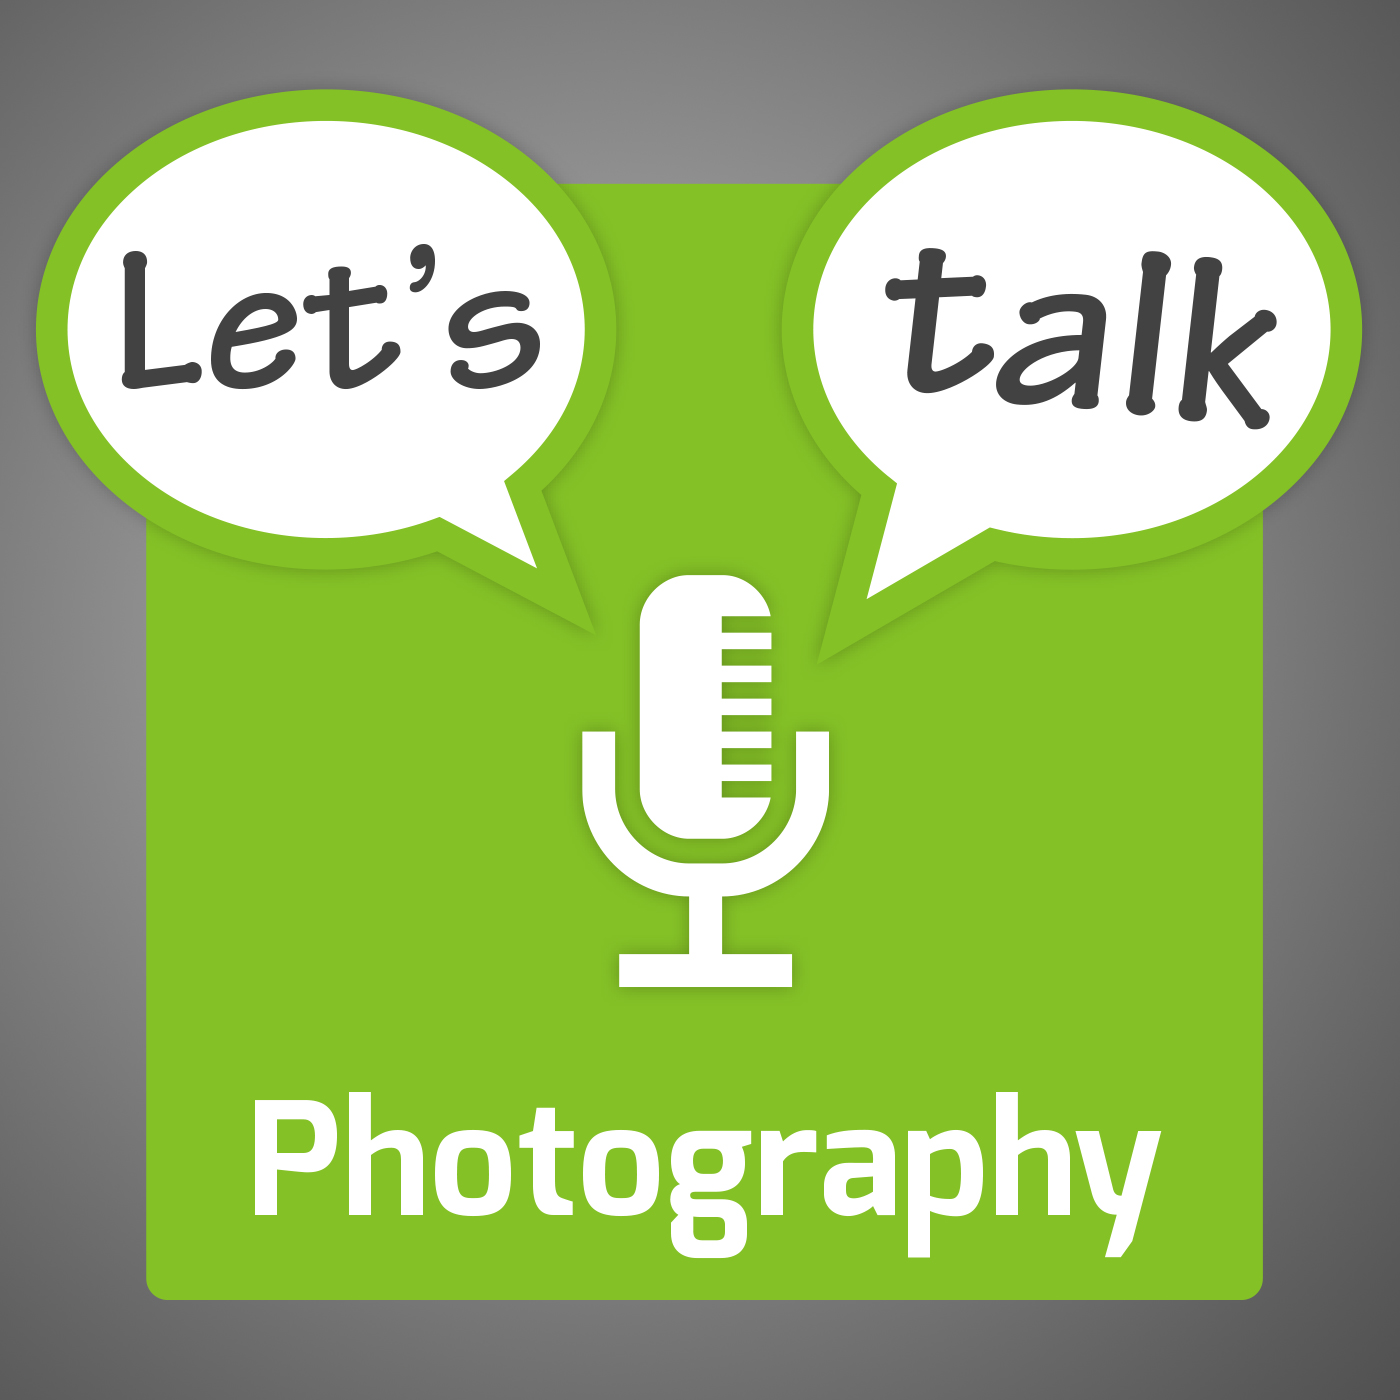 Let's Talk photography